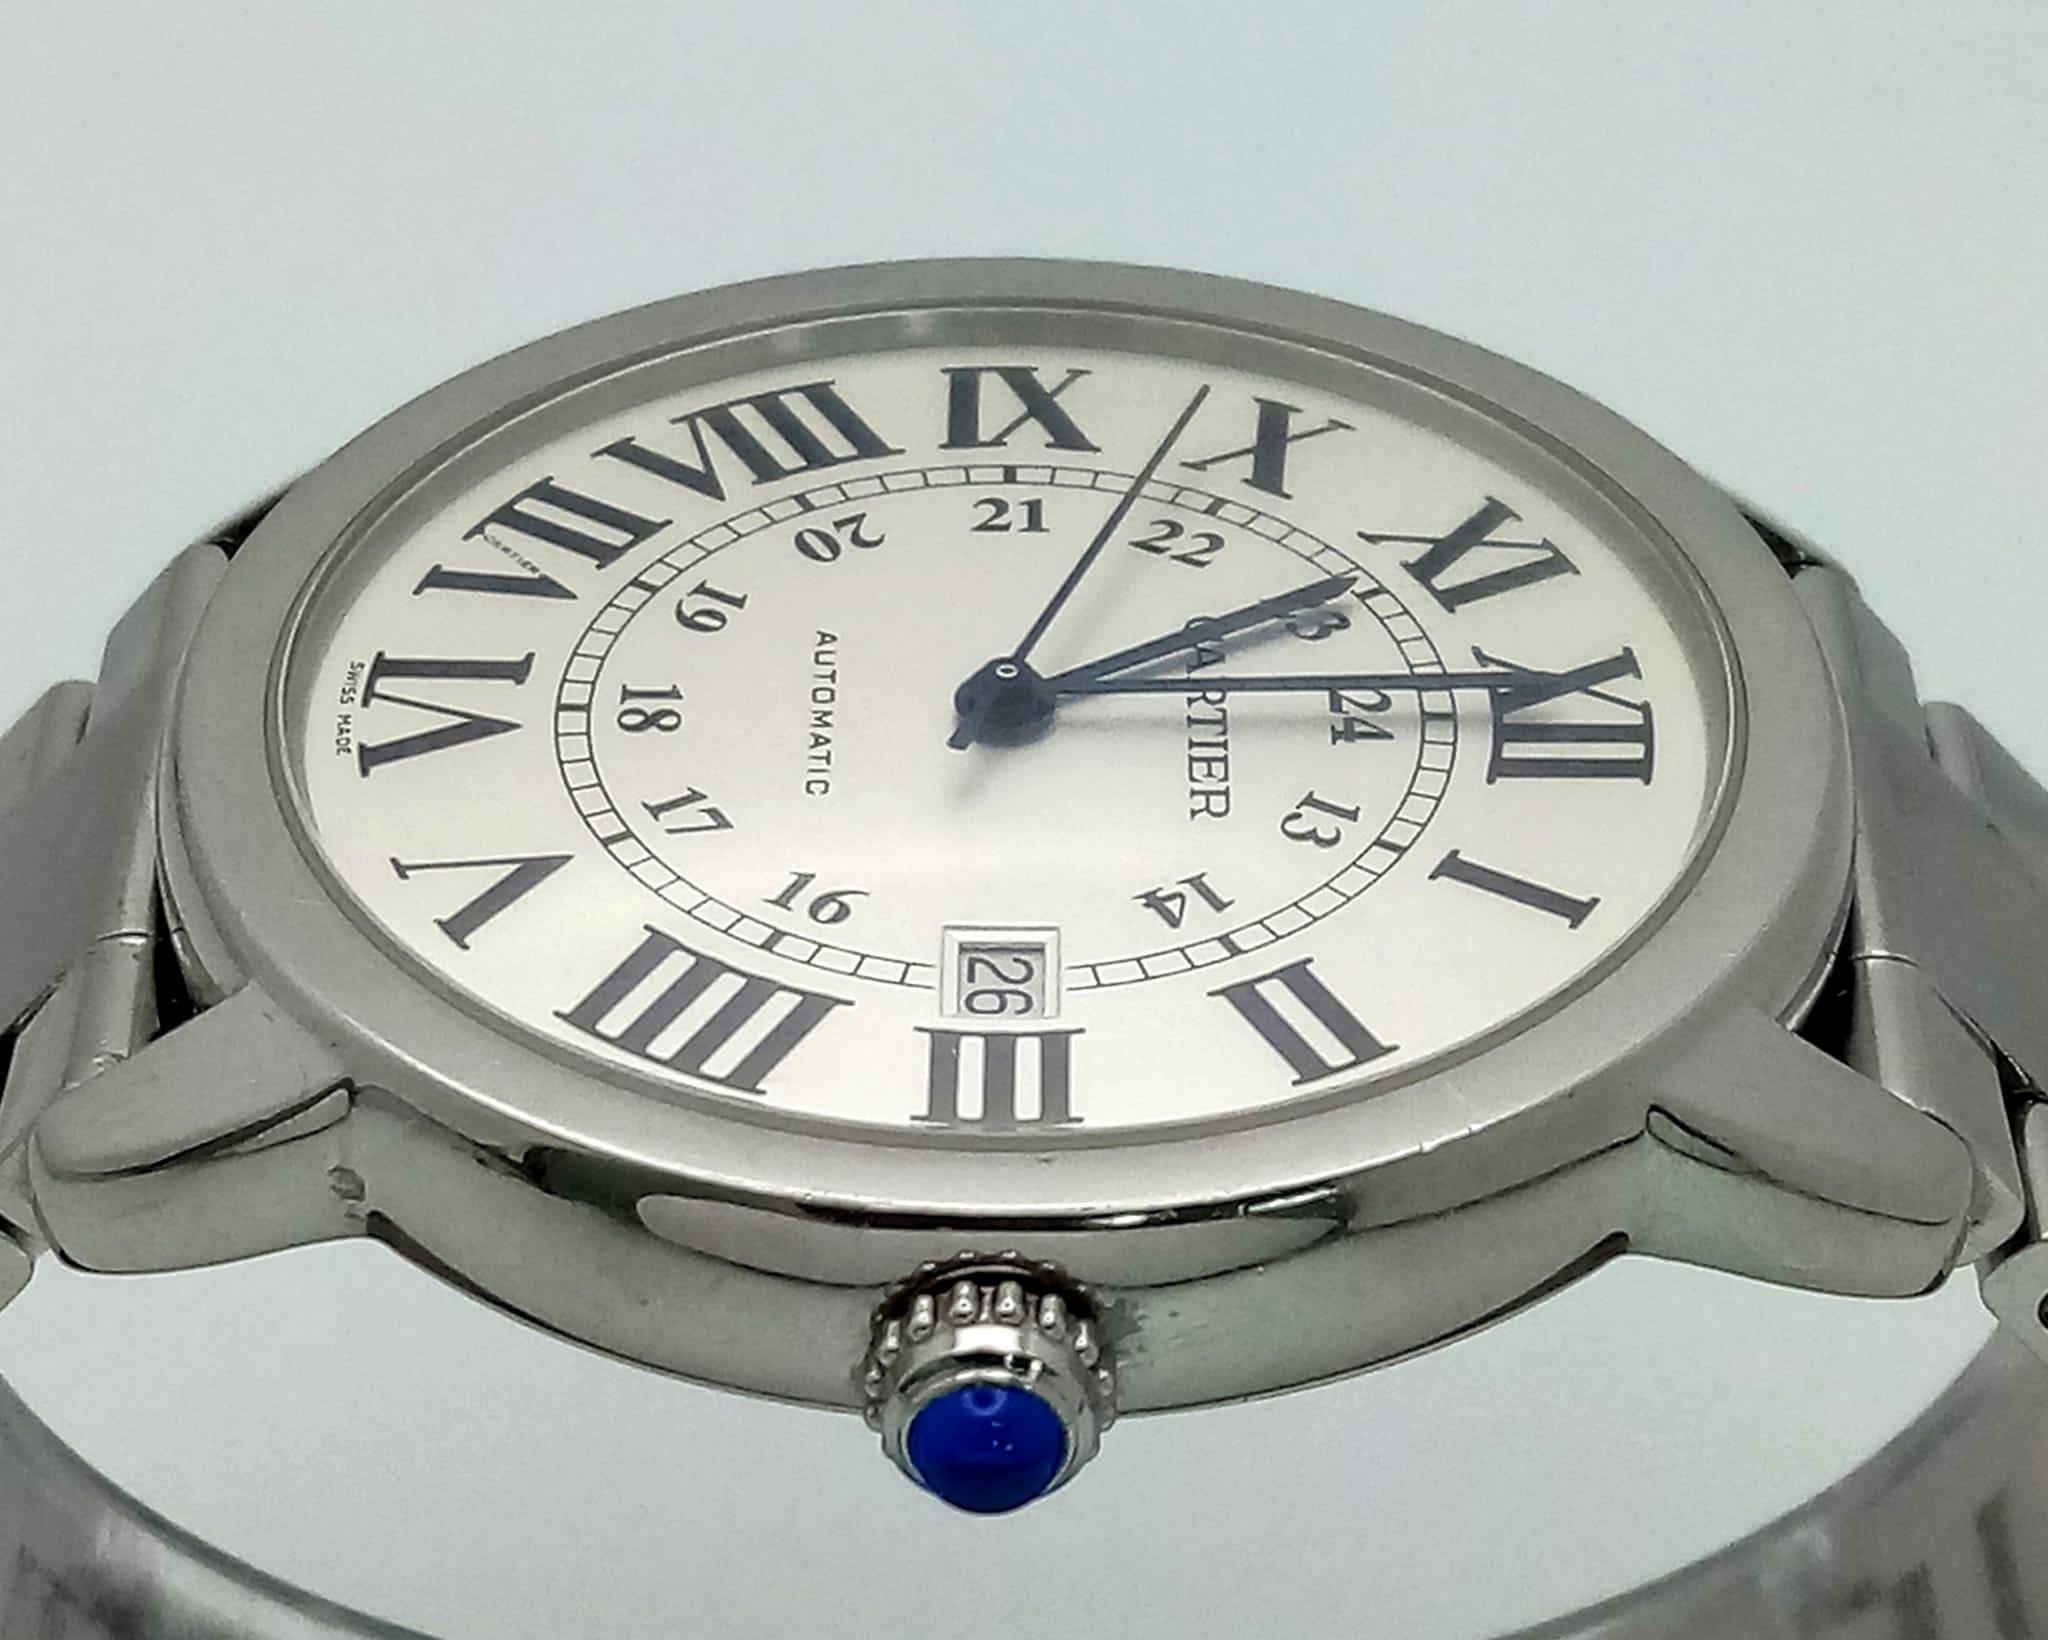 A CARTIER STAINLESS STEEL GENTS AUTOMATIC "RONDE SOLO" WATCH WITH BOX AND PAPERS 42mm 14808 - Image 4 of 10